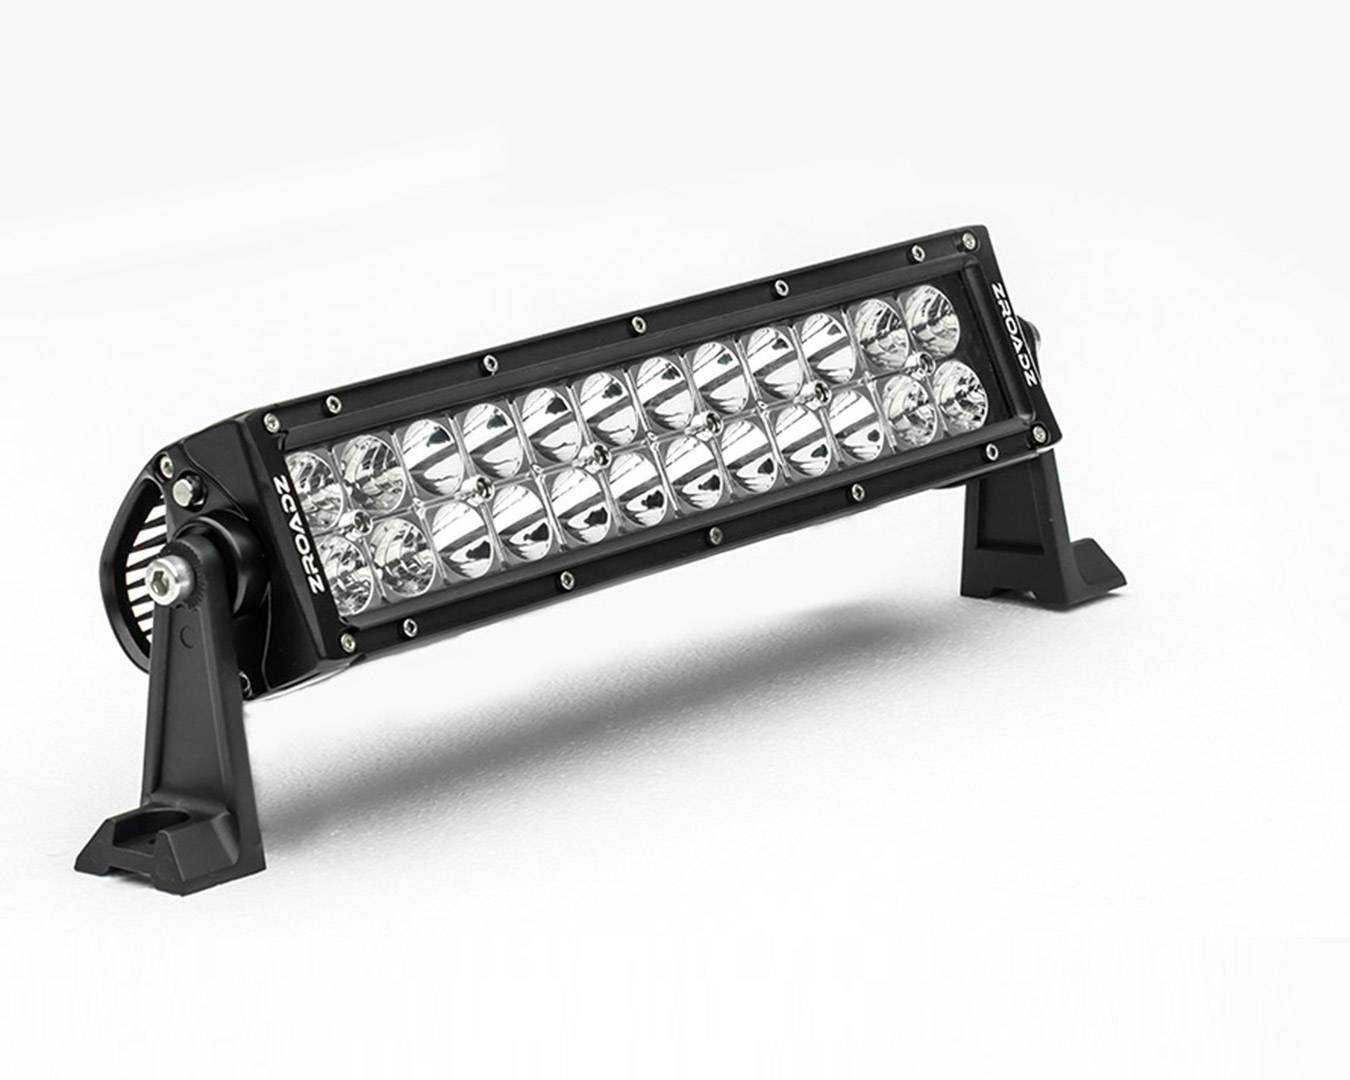 ZROADZ LED Straight Double Row 12 Inch Light Bar Universal Bolt-on No Drilling Required Z30BC14W72